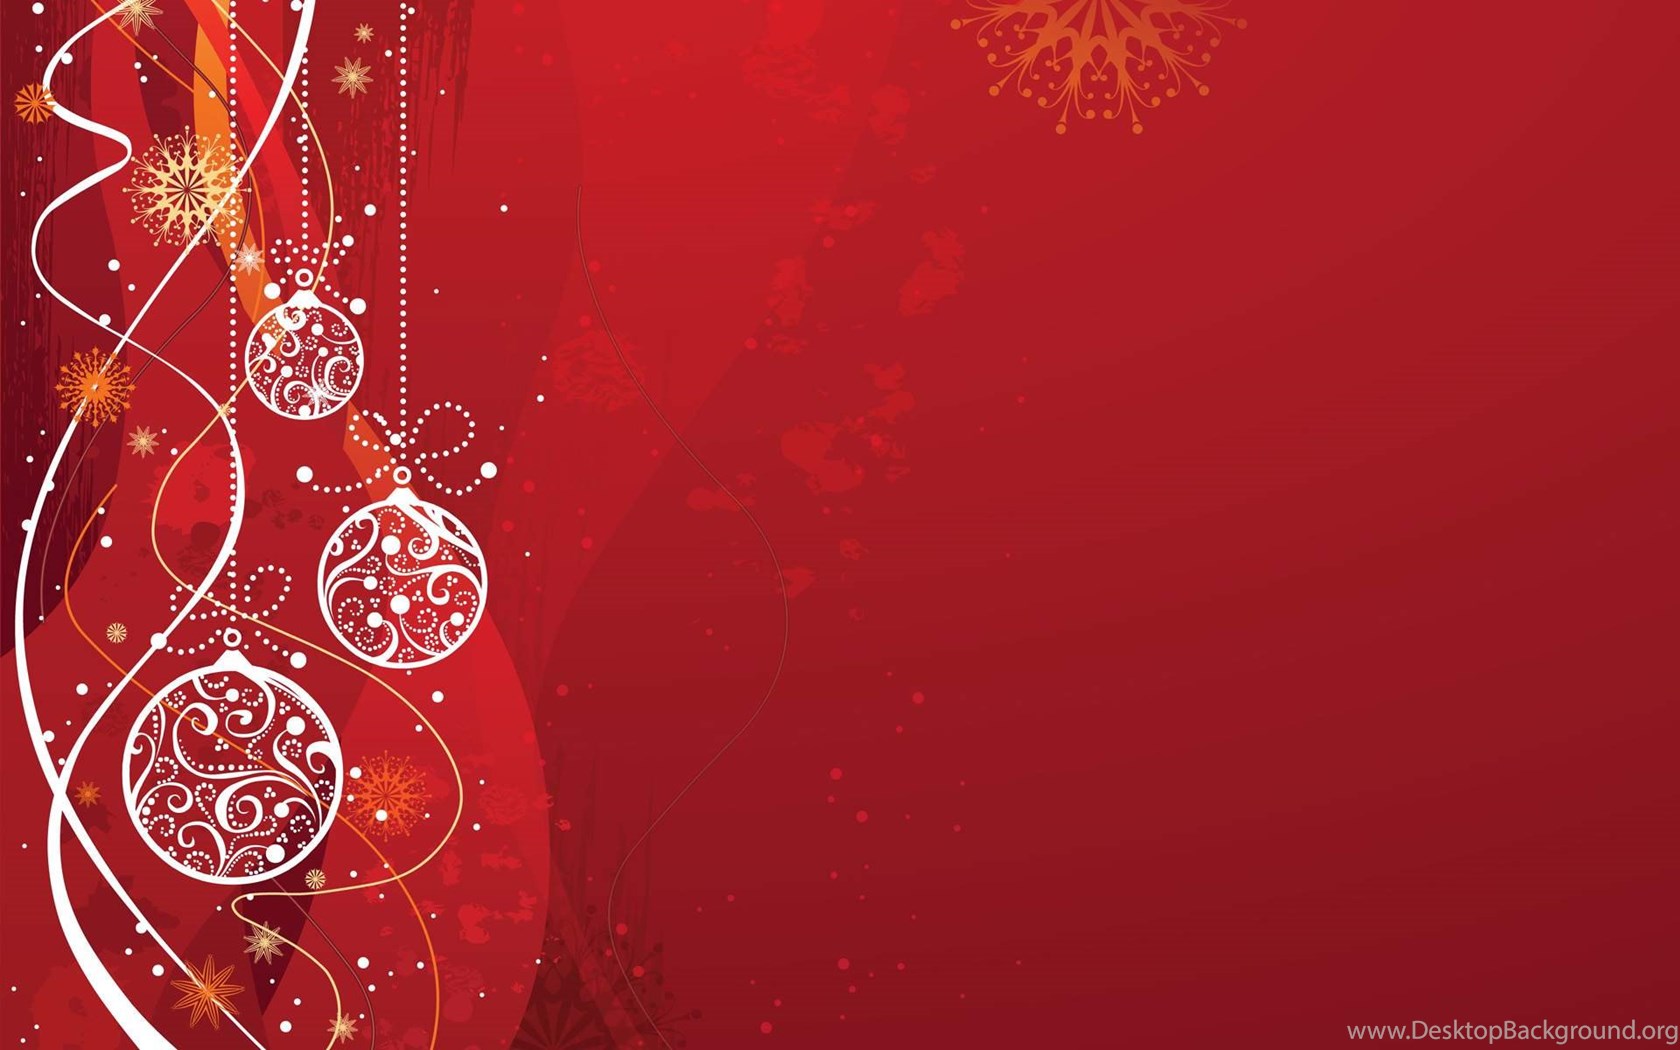 Christmas Wallpaper Background Christmas Day Wishes Or. Desktop Background